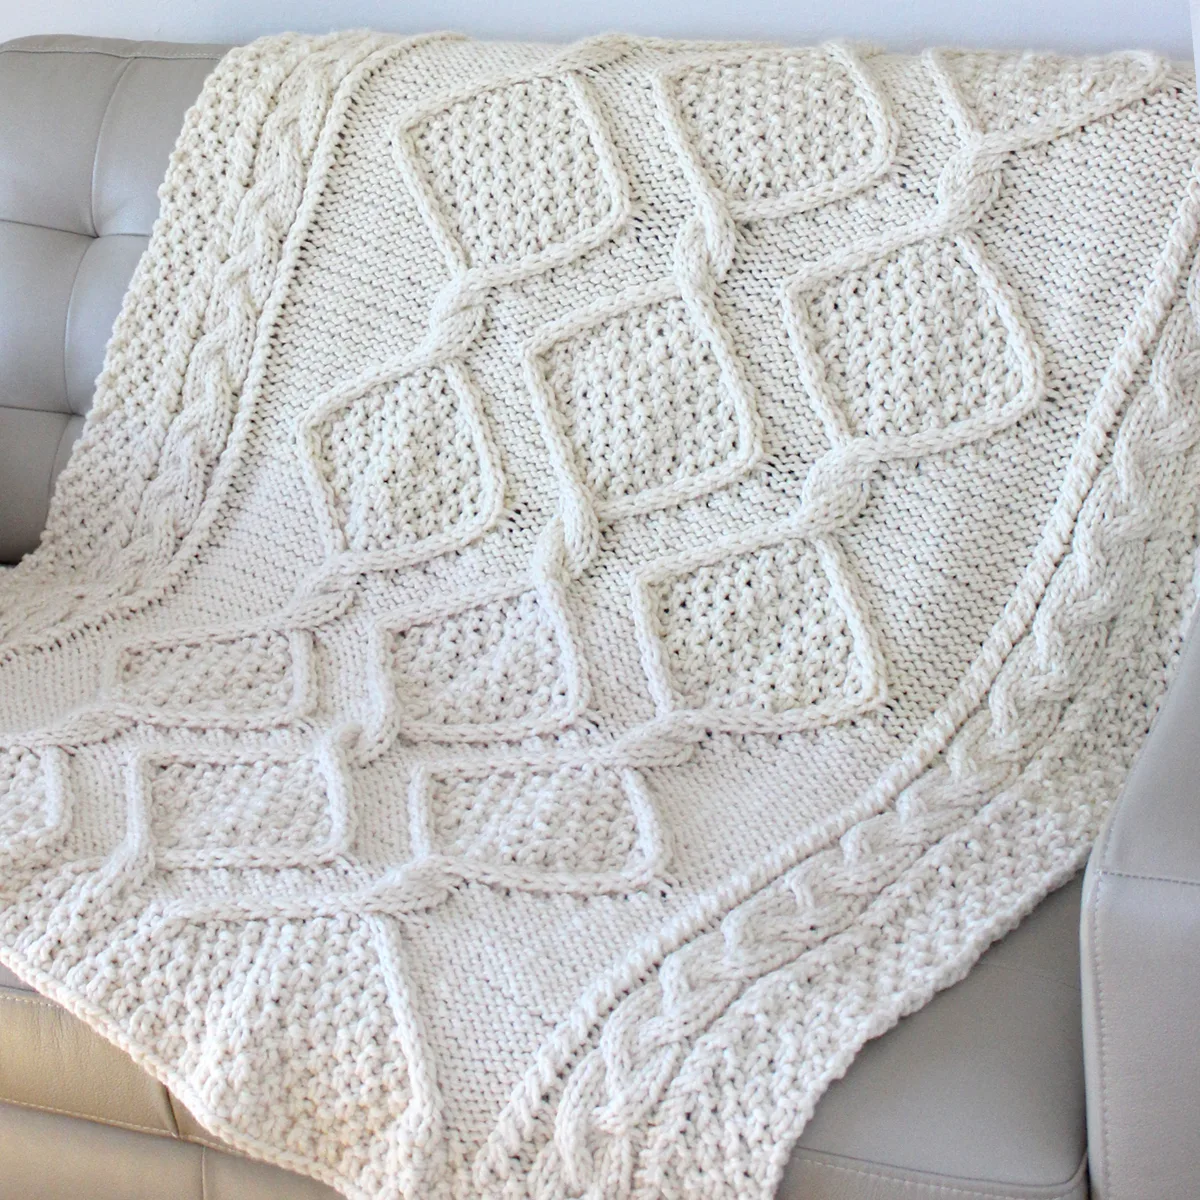 Cable knit blanket in diamond moss stitch draped on a couch in cream colored yarn.